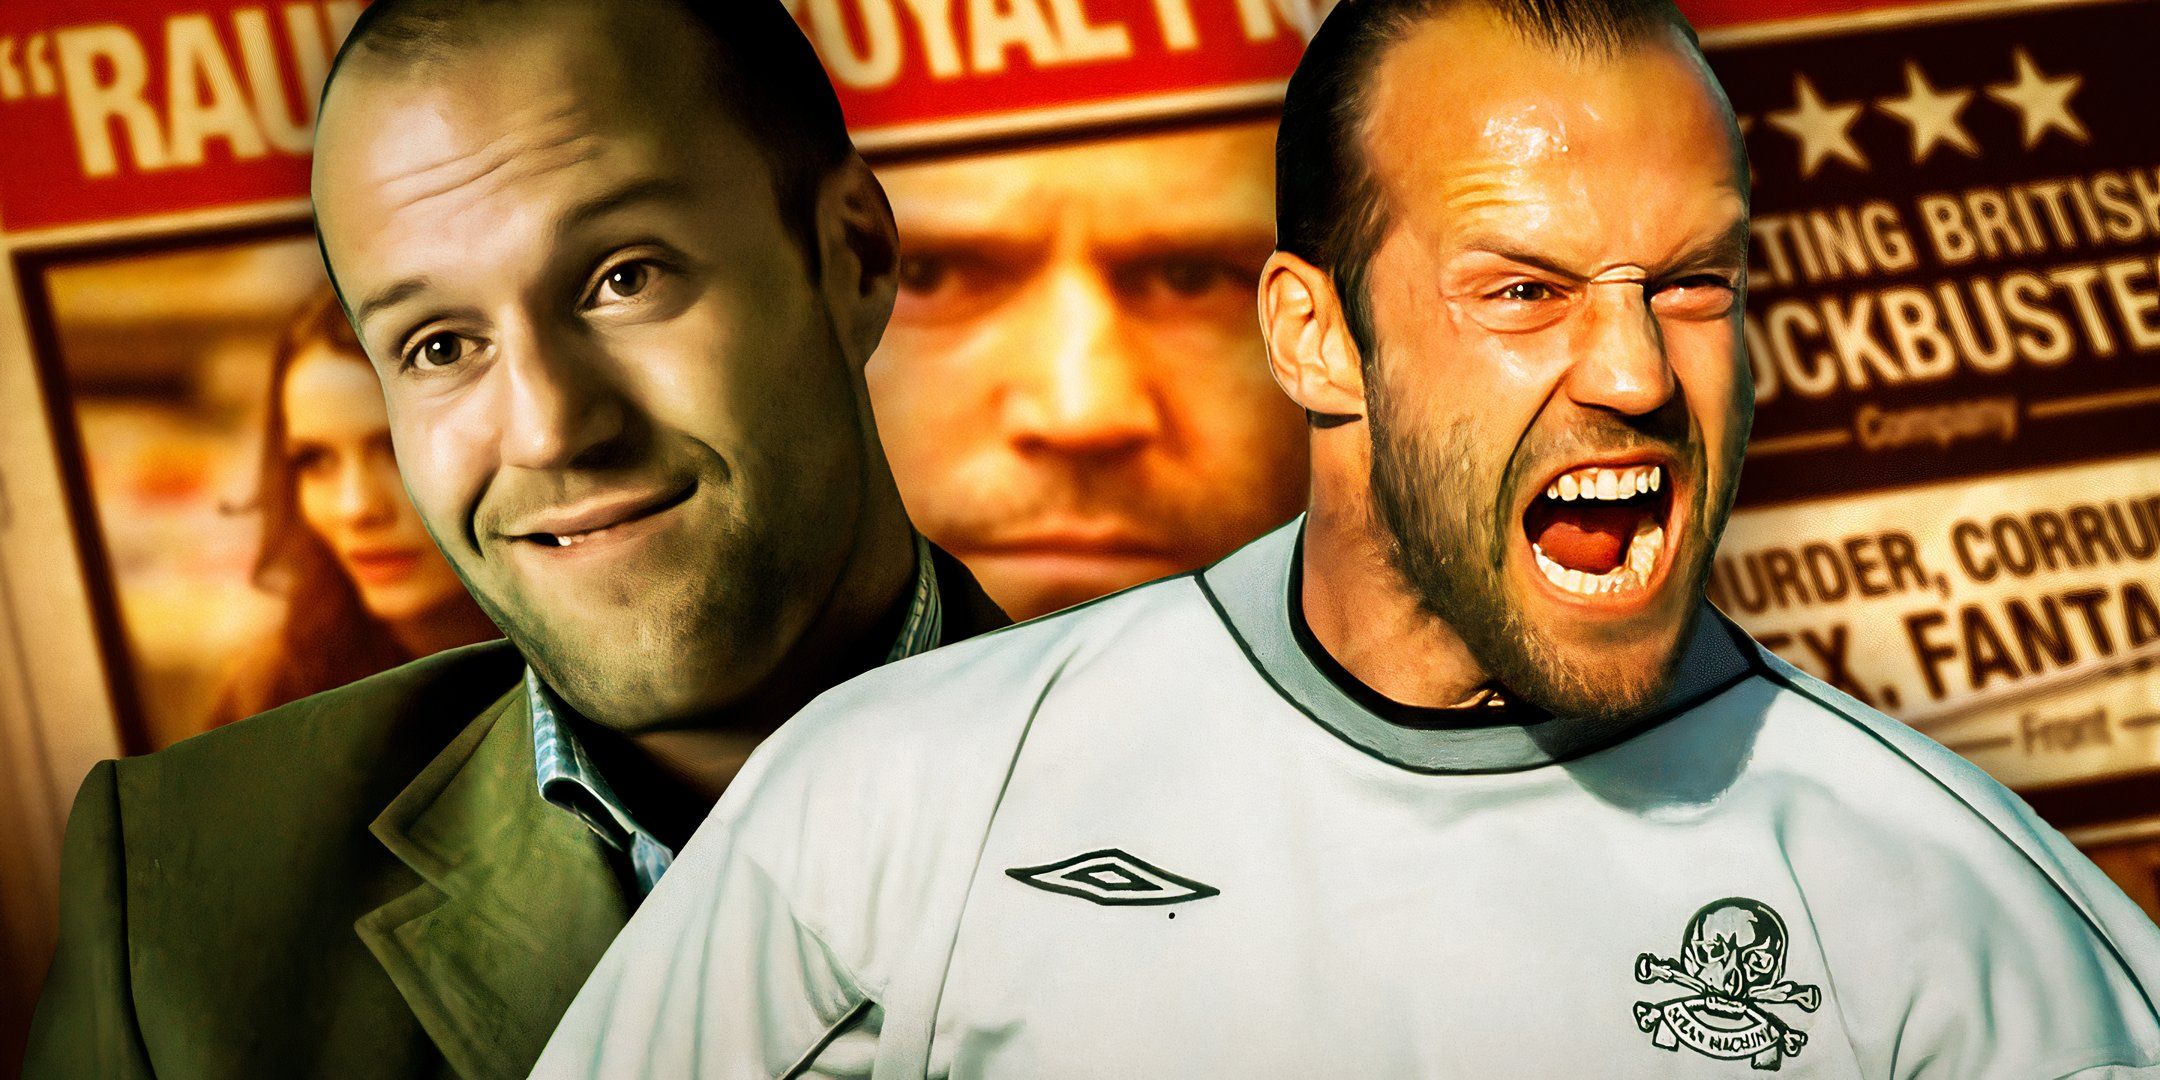 Jason Statham as Monk from Mean Machine and Jason Statham as Turkish from Snatch